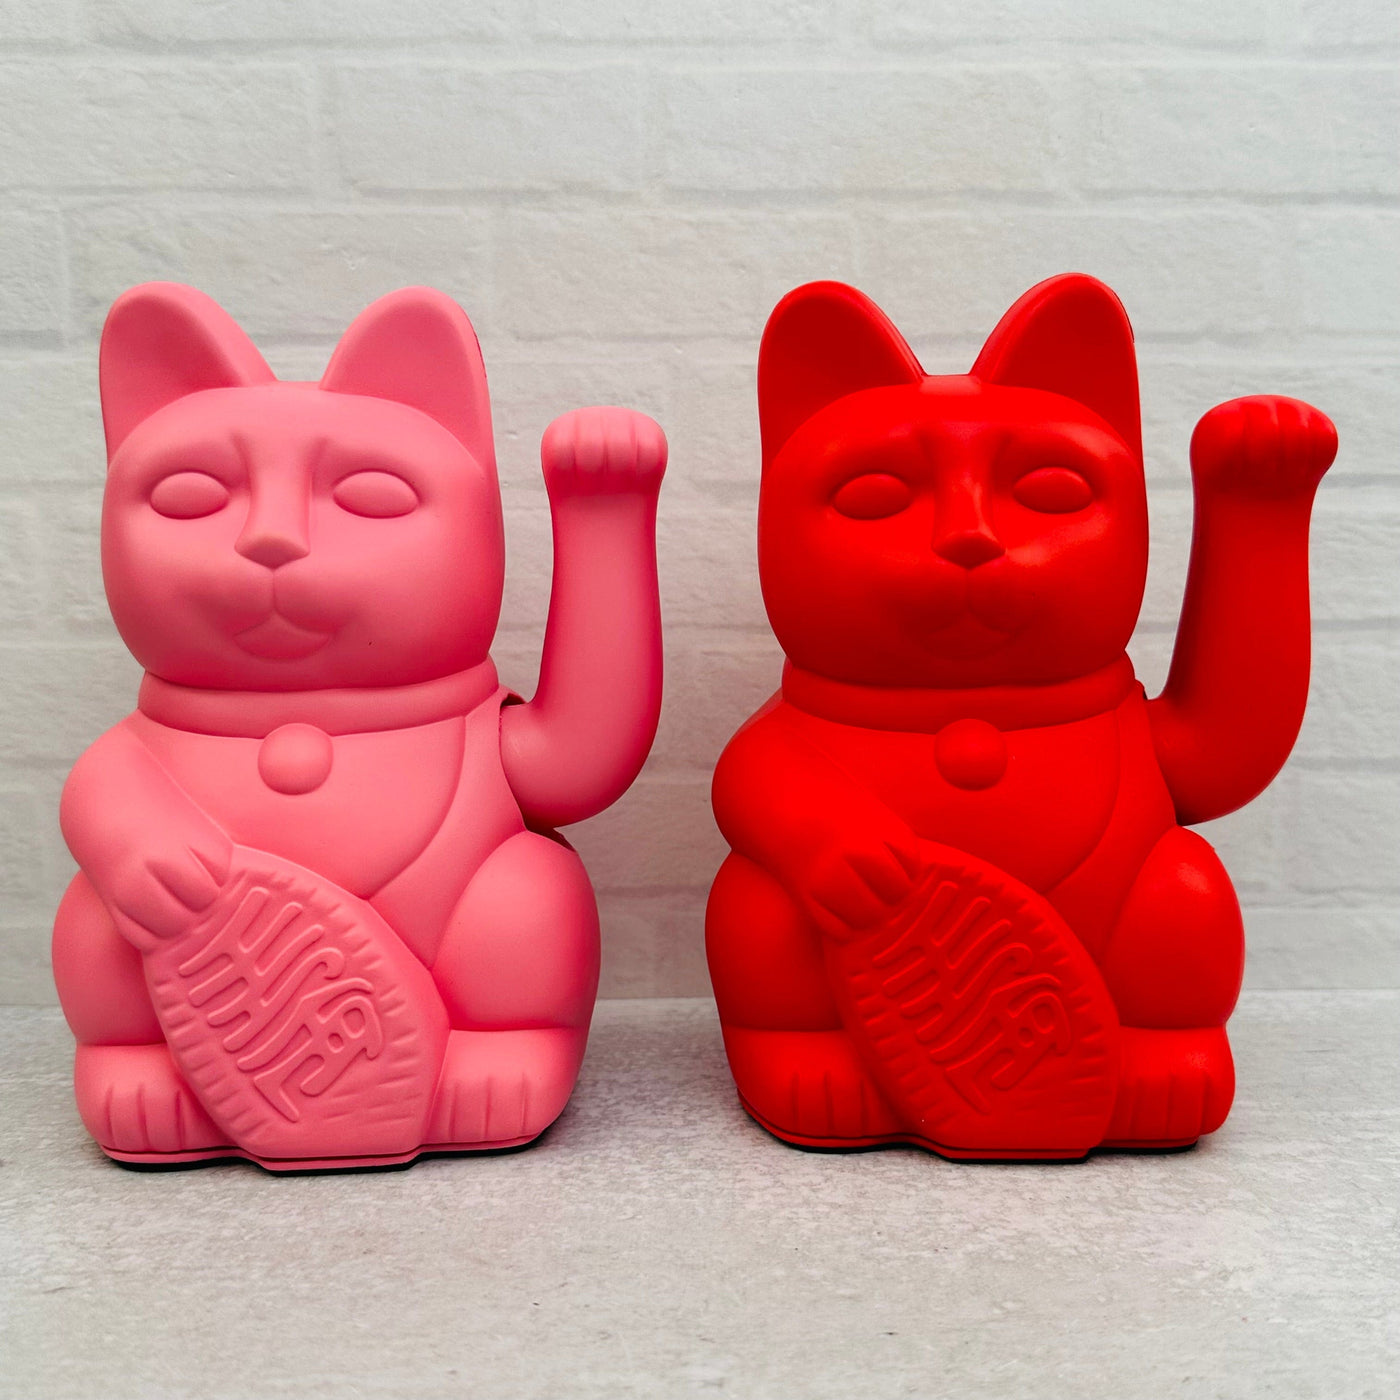 cats available in pink and red 